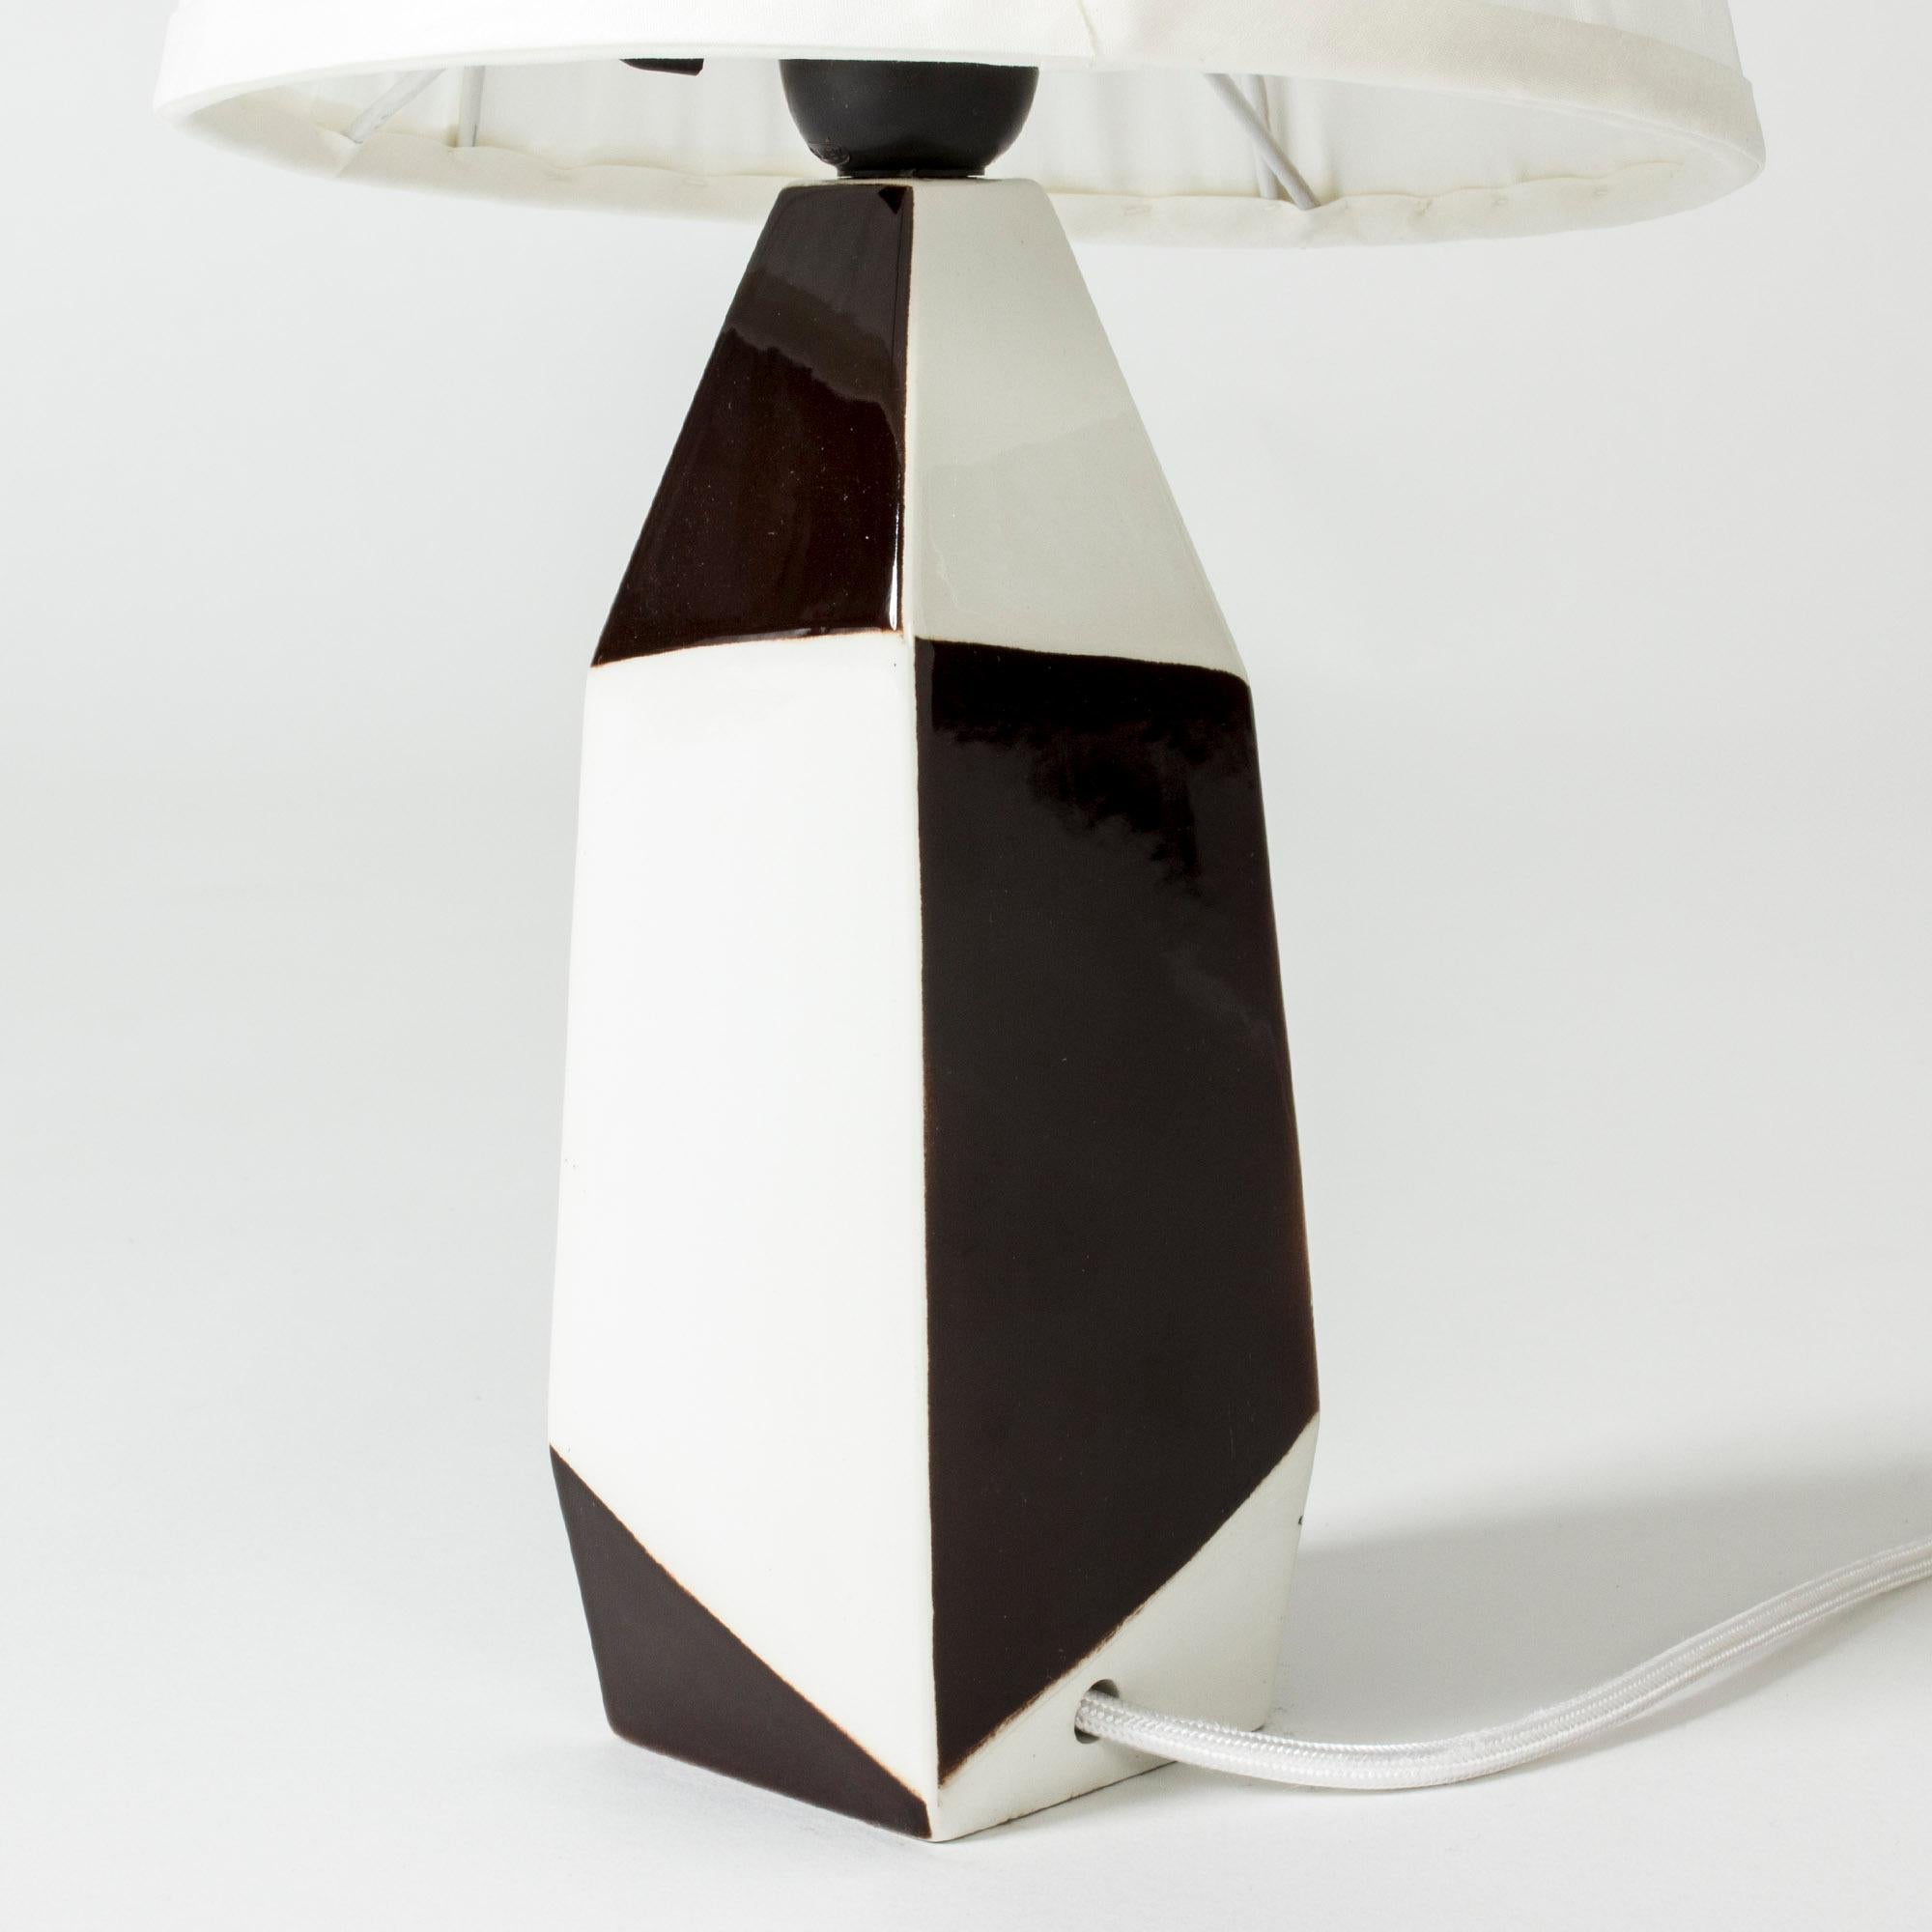 Mid-20th Century Table Lamp by Carl-Harry Stålhane for Rörstrand, Sweden, 1950s